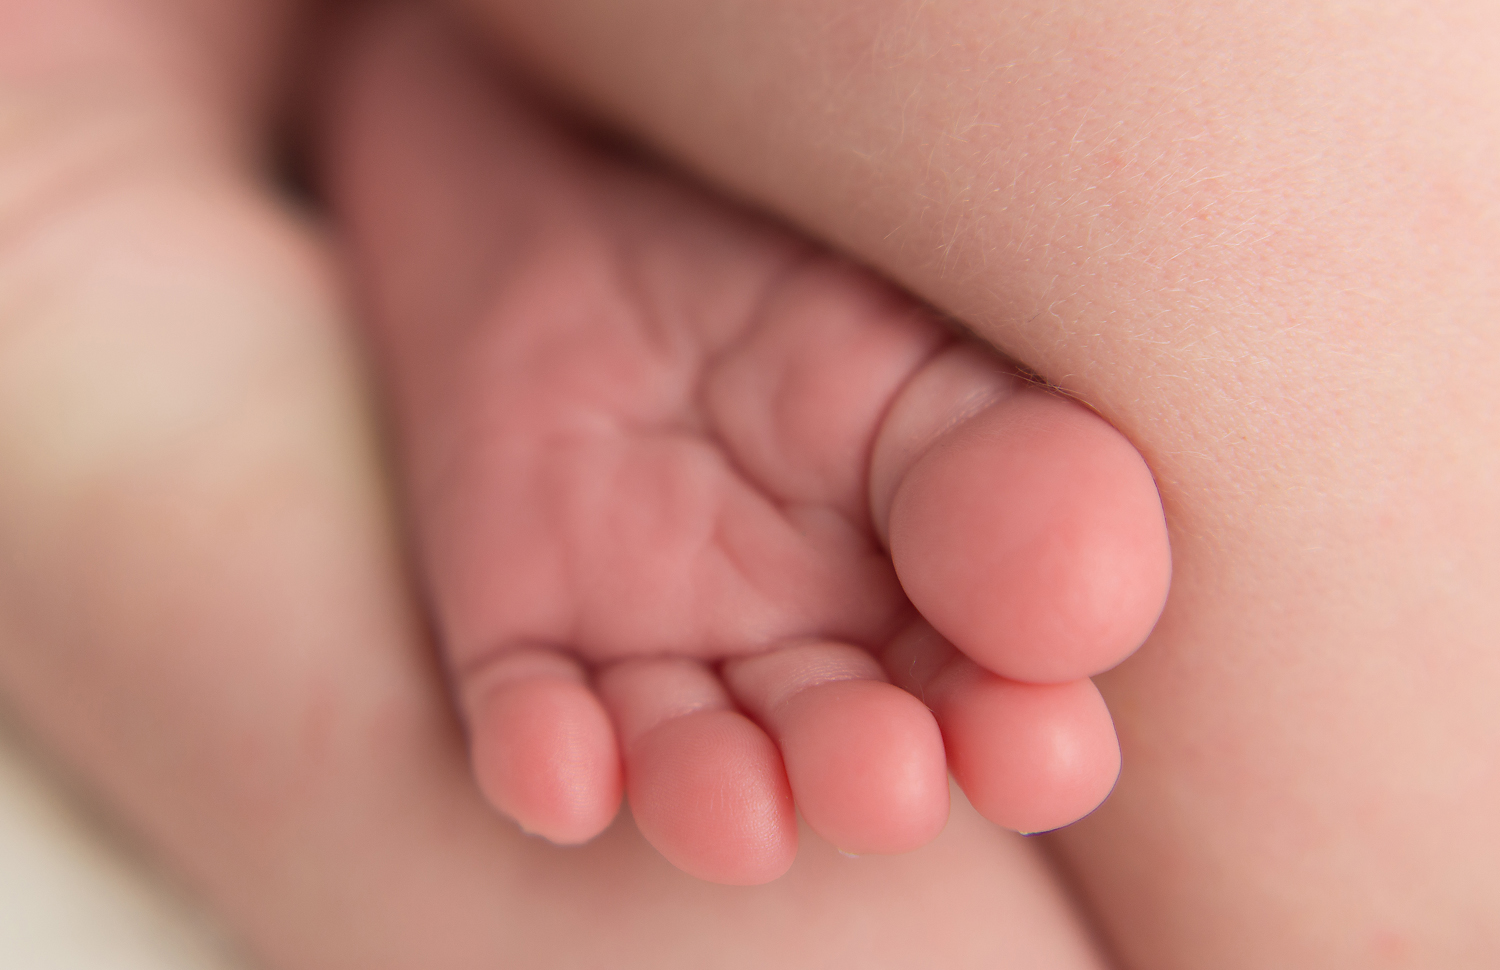 close up photo of baby feet and toes-new born baby pic- professional photography near me-parma heights ohio 44130.jpg